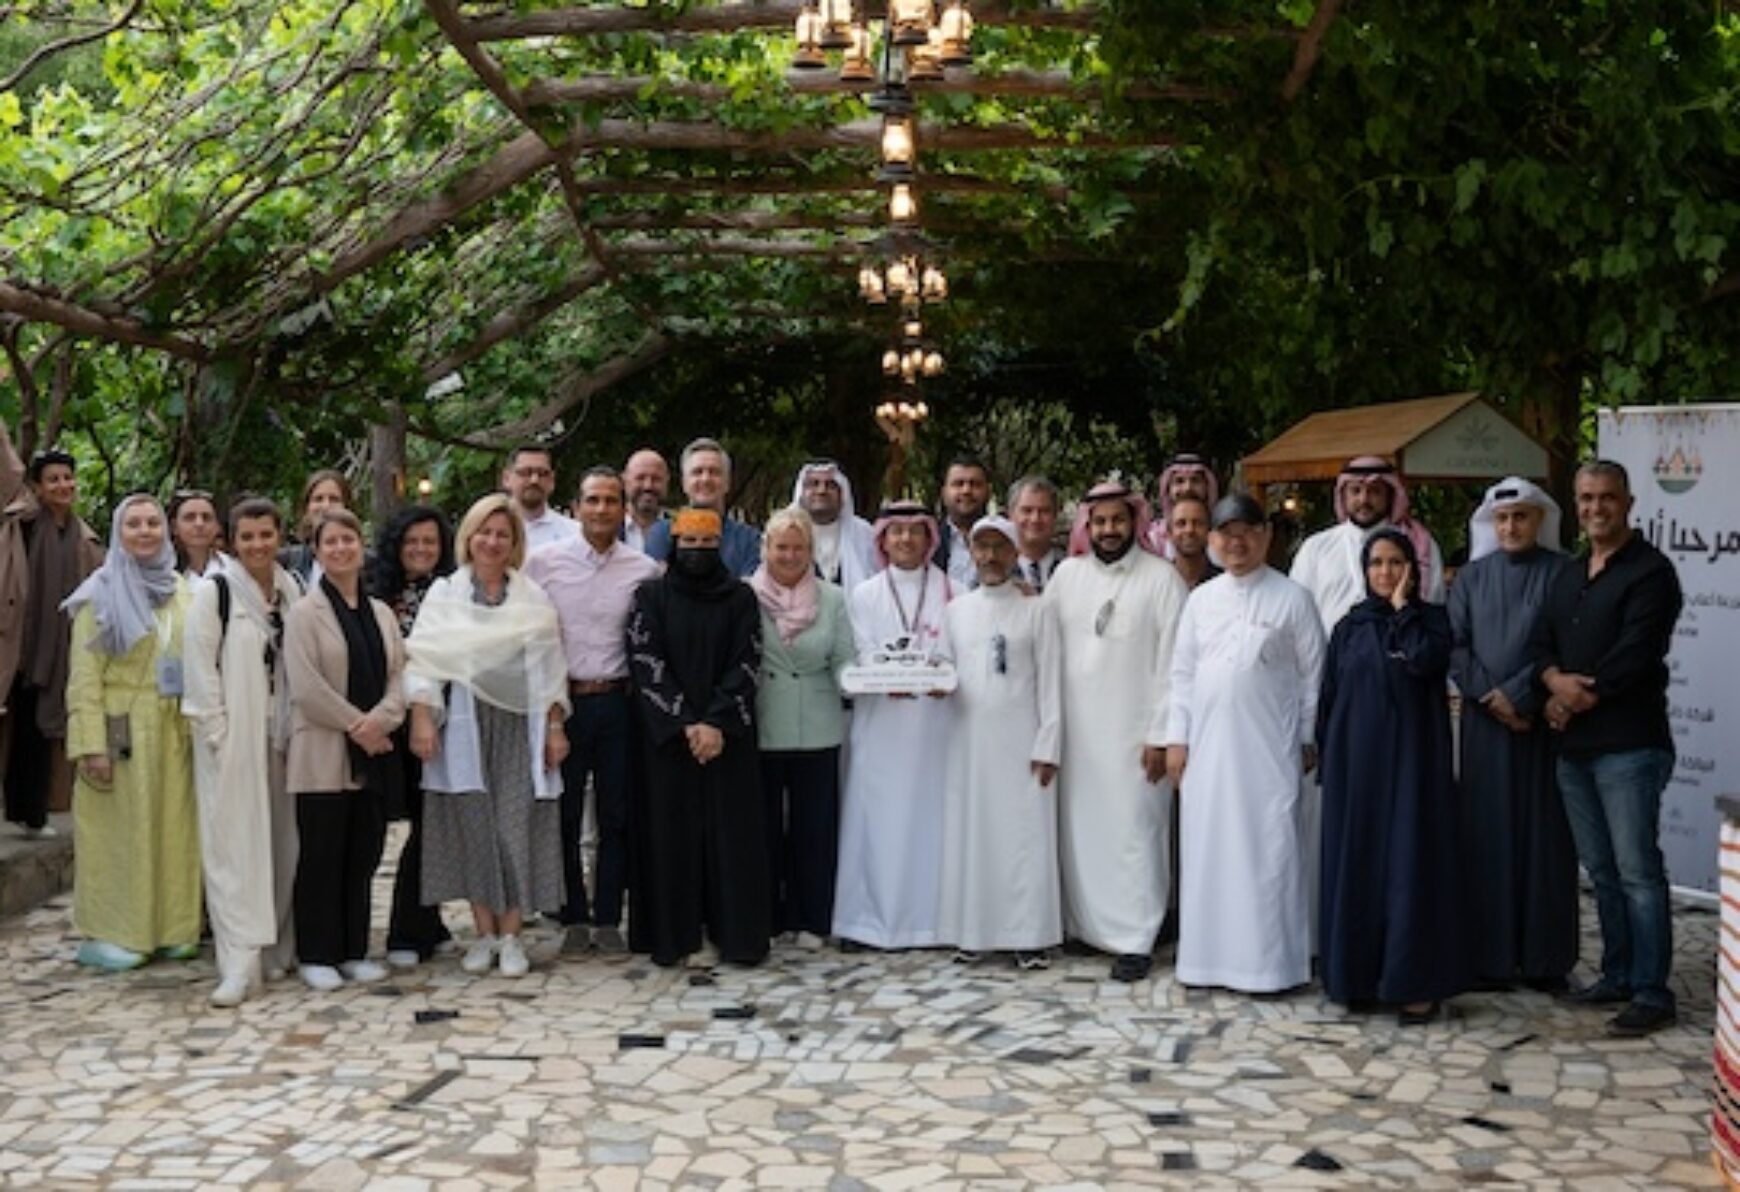 World Regions of Gastronomy build stronger connections at their 27th meeting